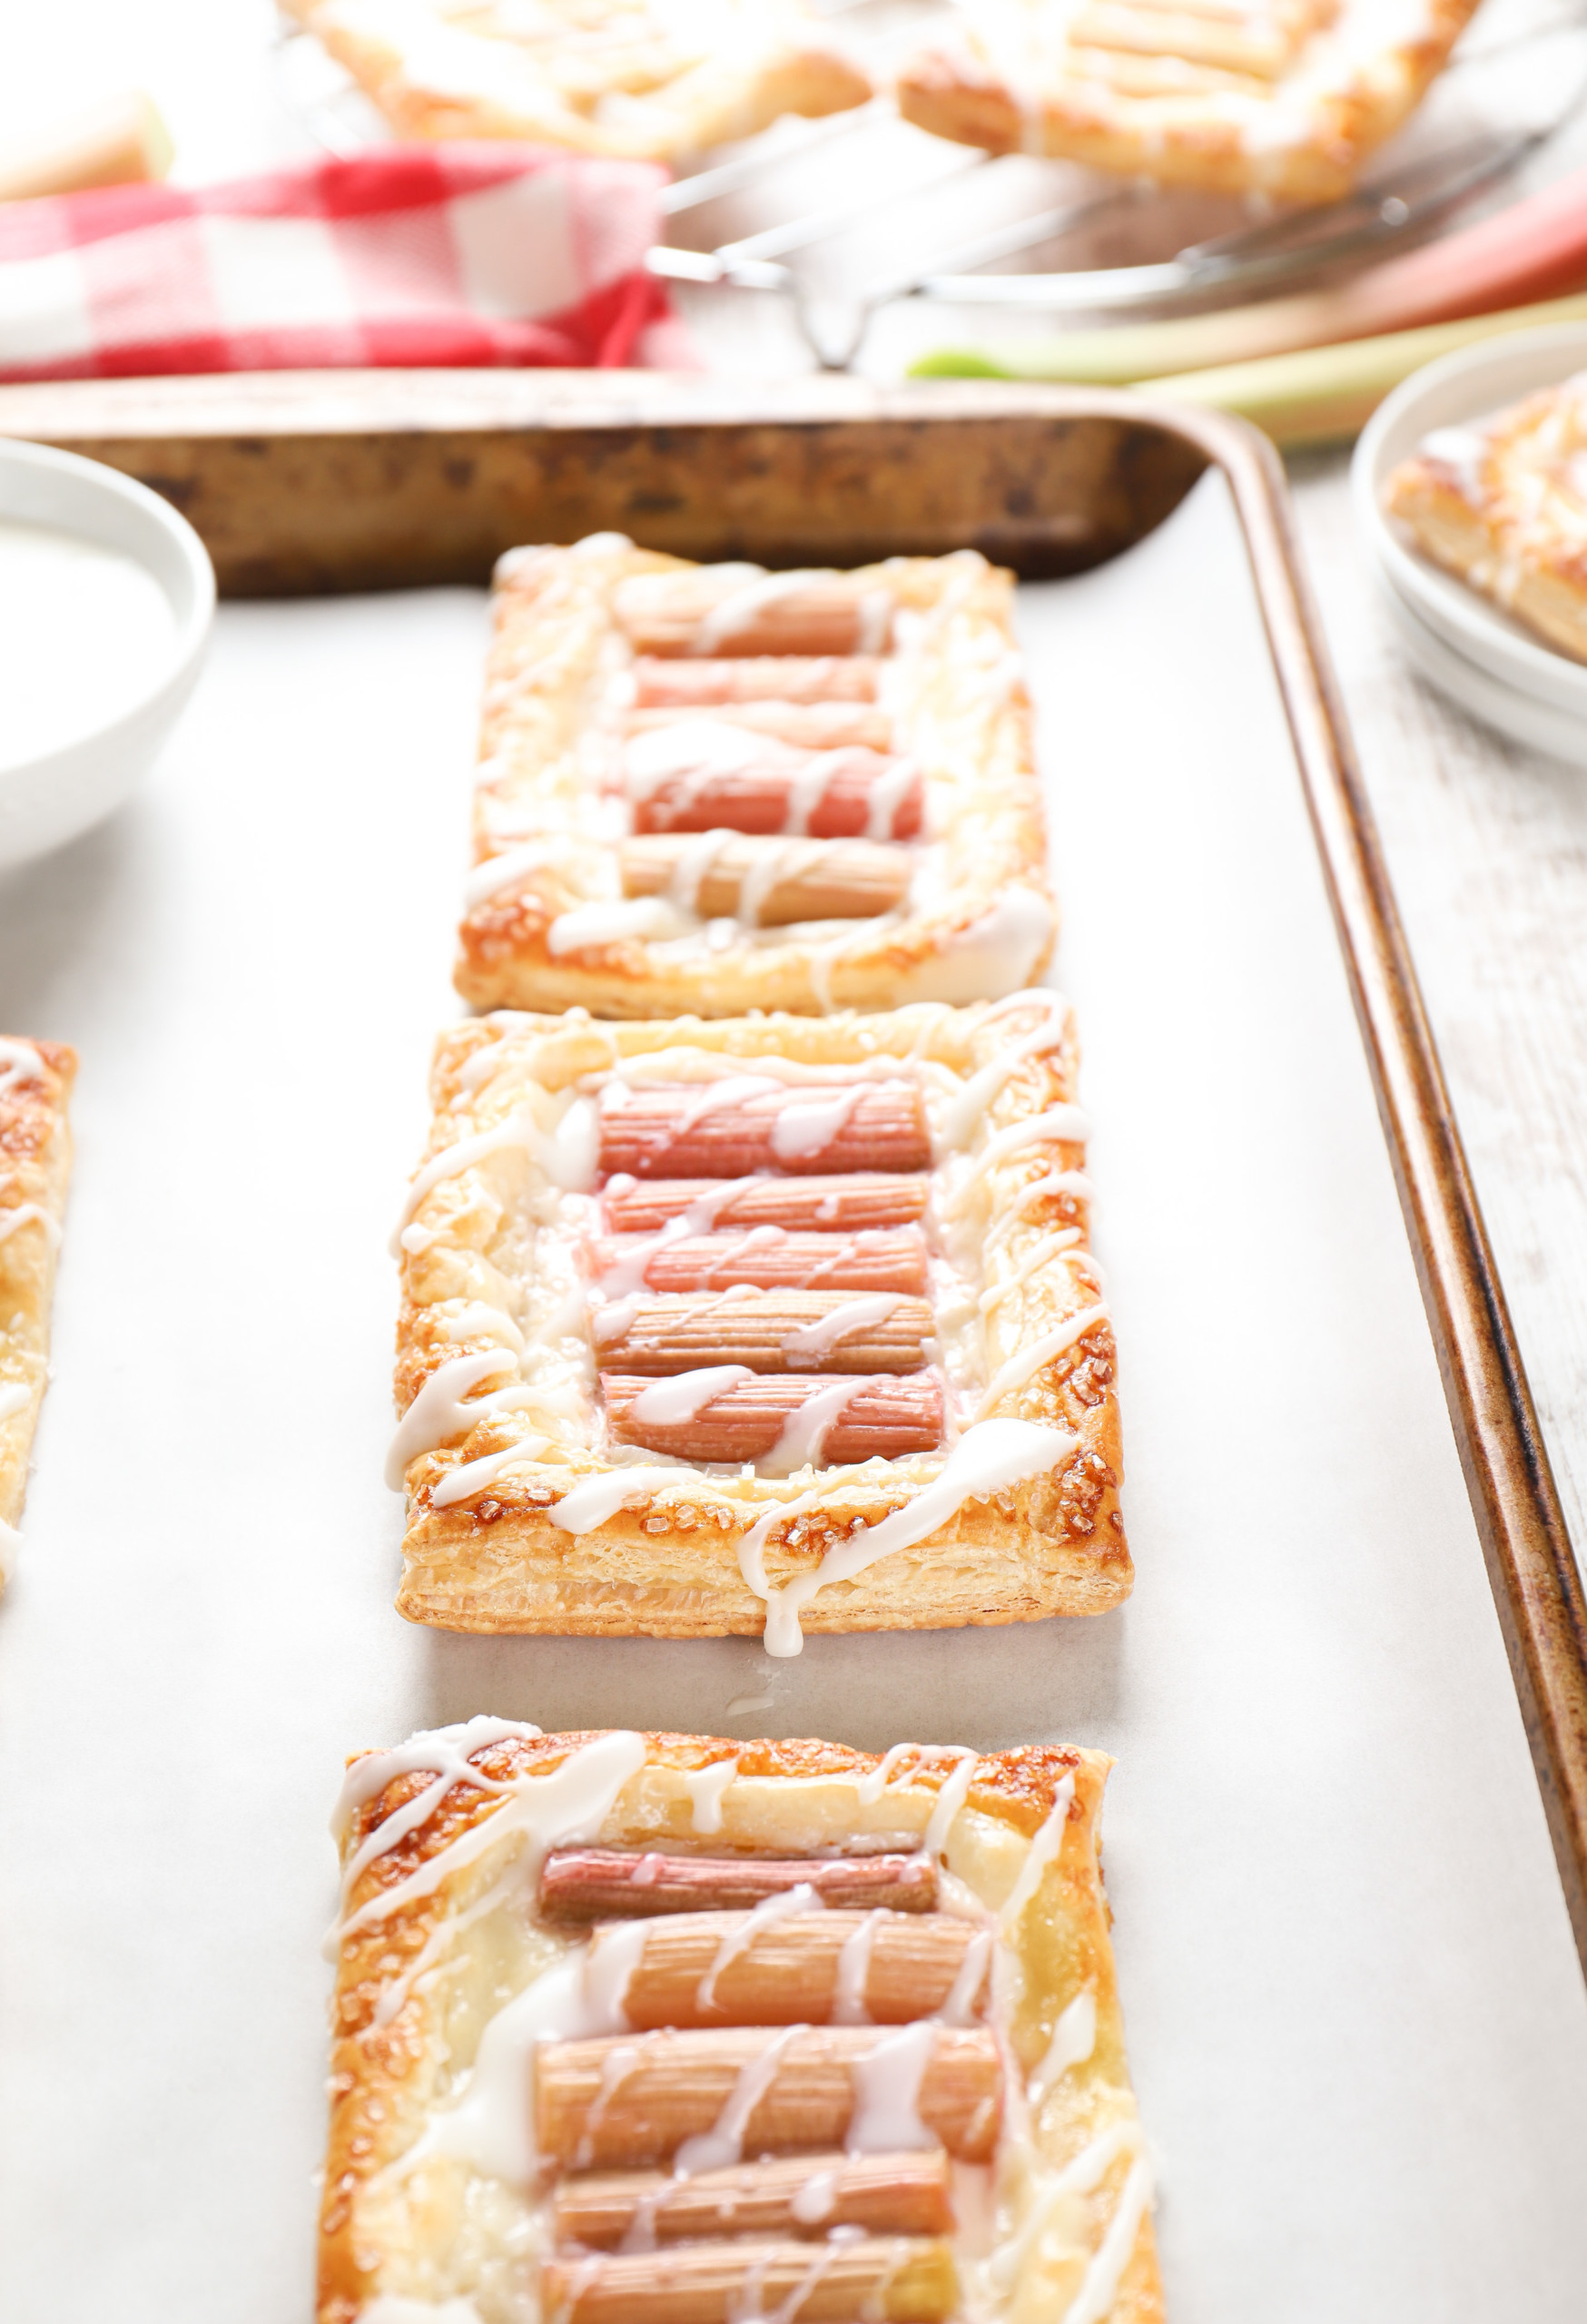 Up close side view to show the flaky layers of a rhubarb cream cheese danish on a parchment paper lined baking sheet.